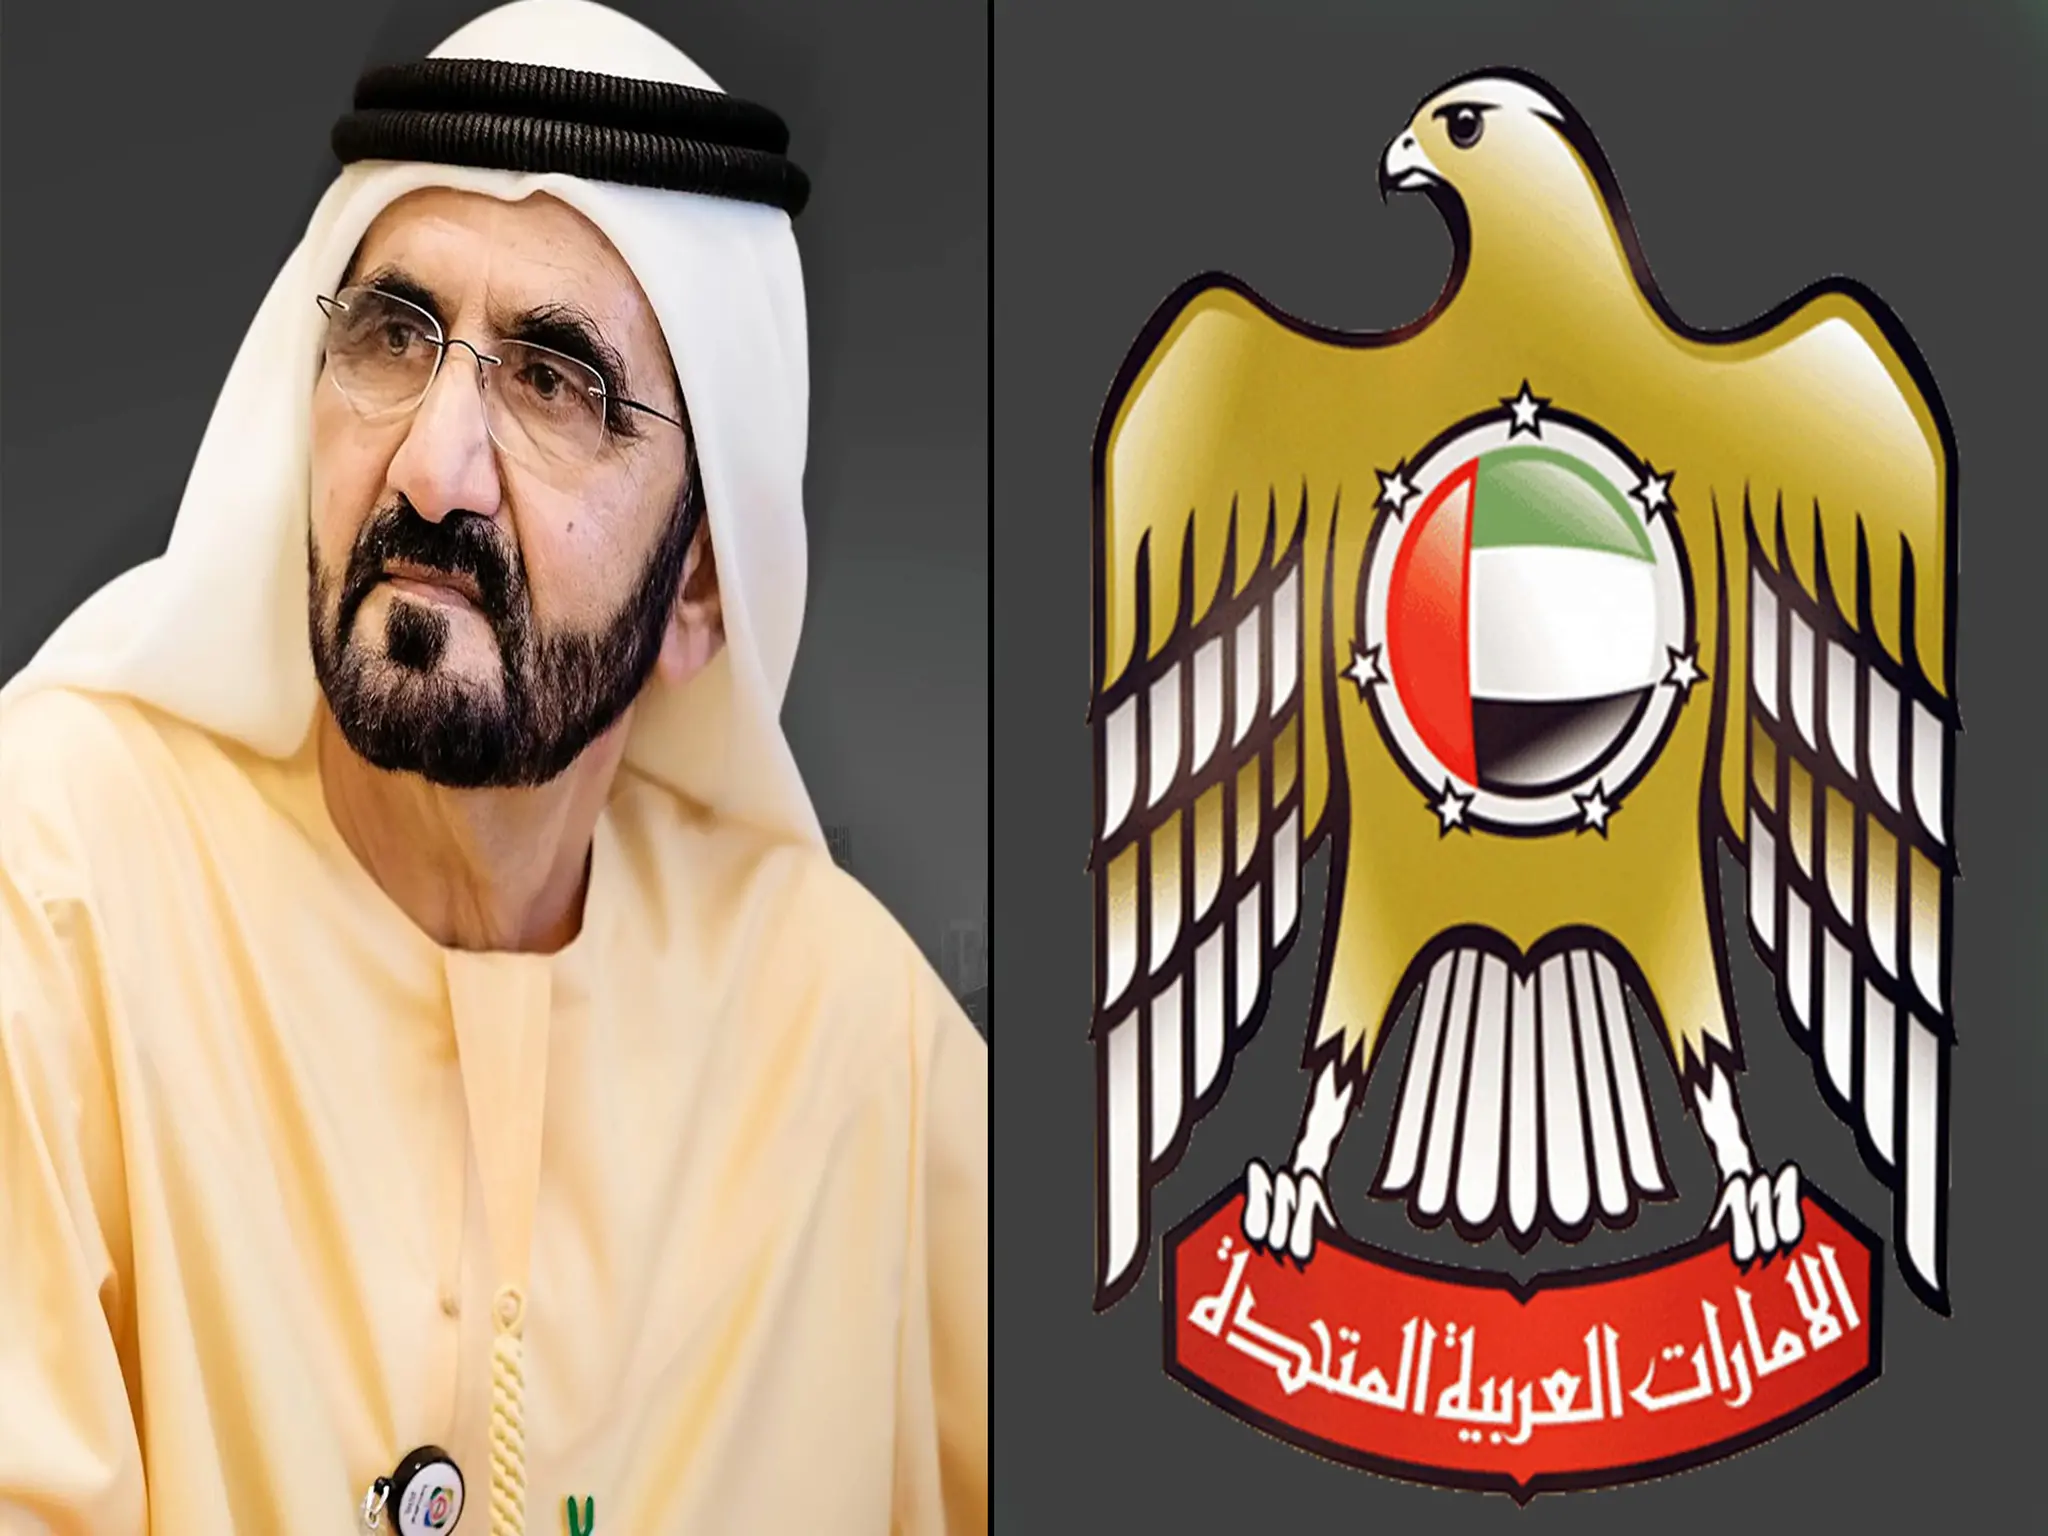 UAE: Protecting the rights of workers in the private sector and adopting their demands and rights